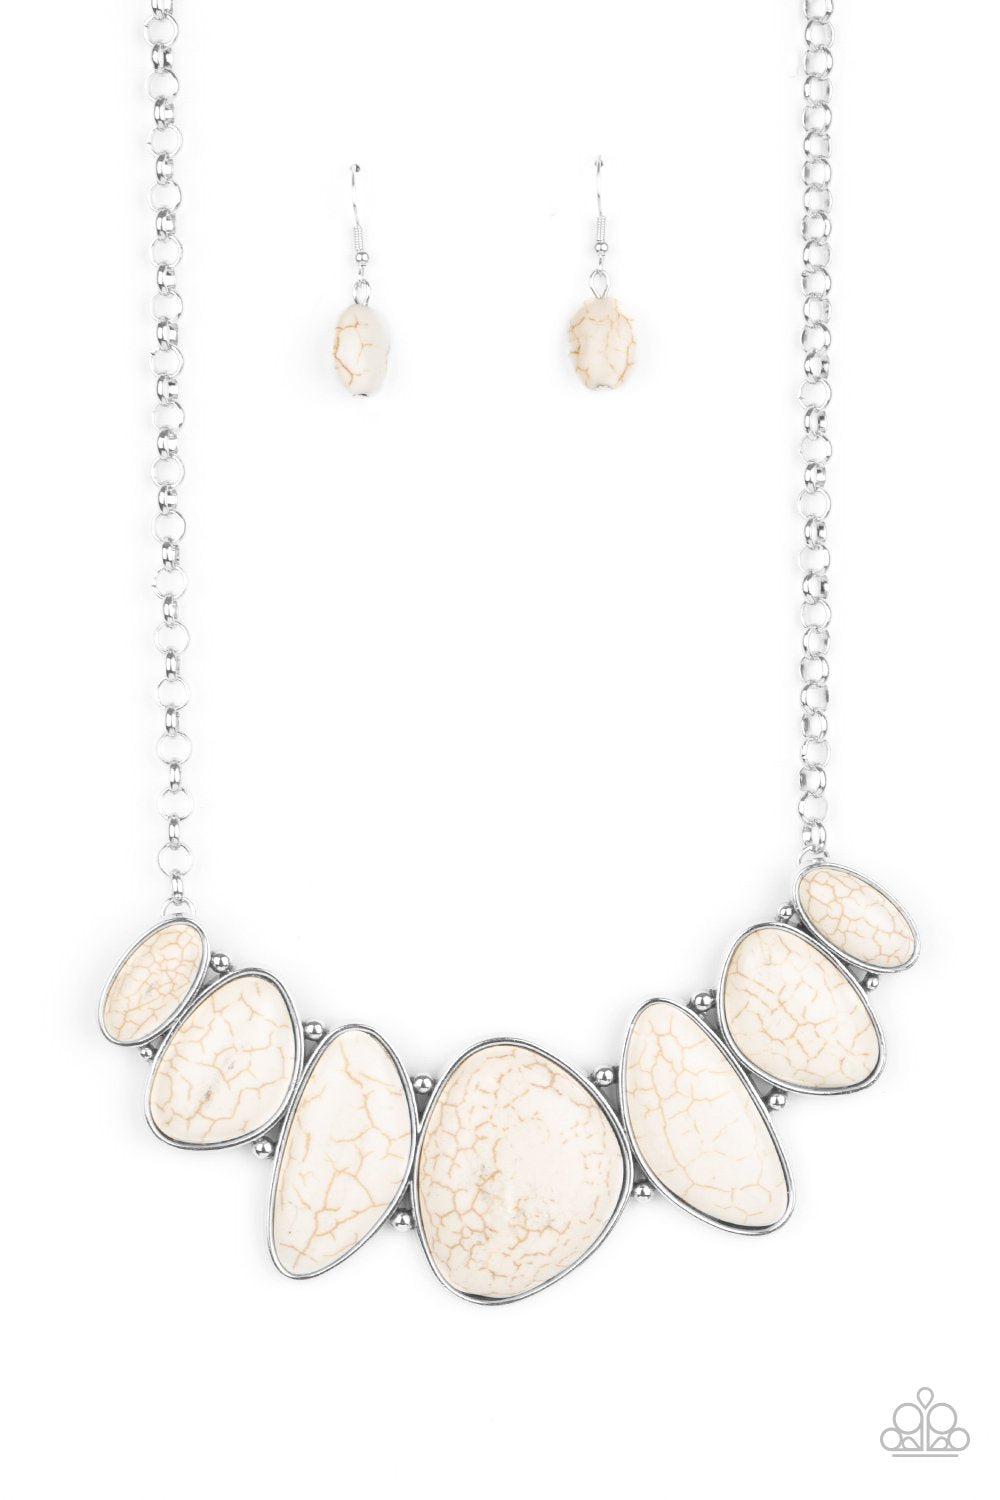 Primitive White Stone Necklace - Paparazzi Accessories - lightbox -CarasShop.com - $5 Jewelry by Cara Jewels